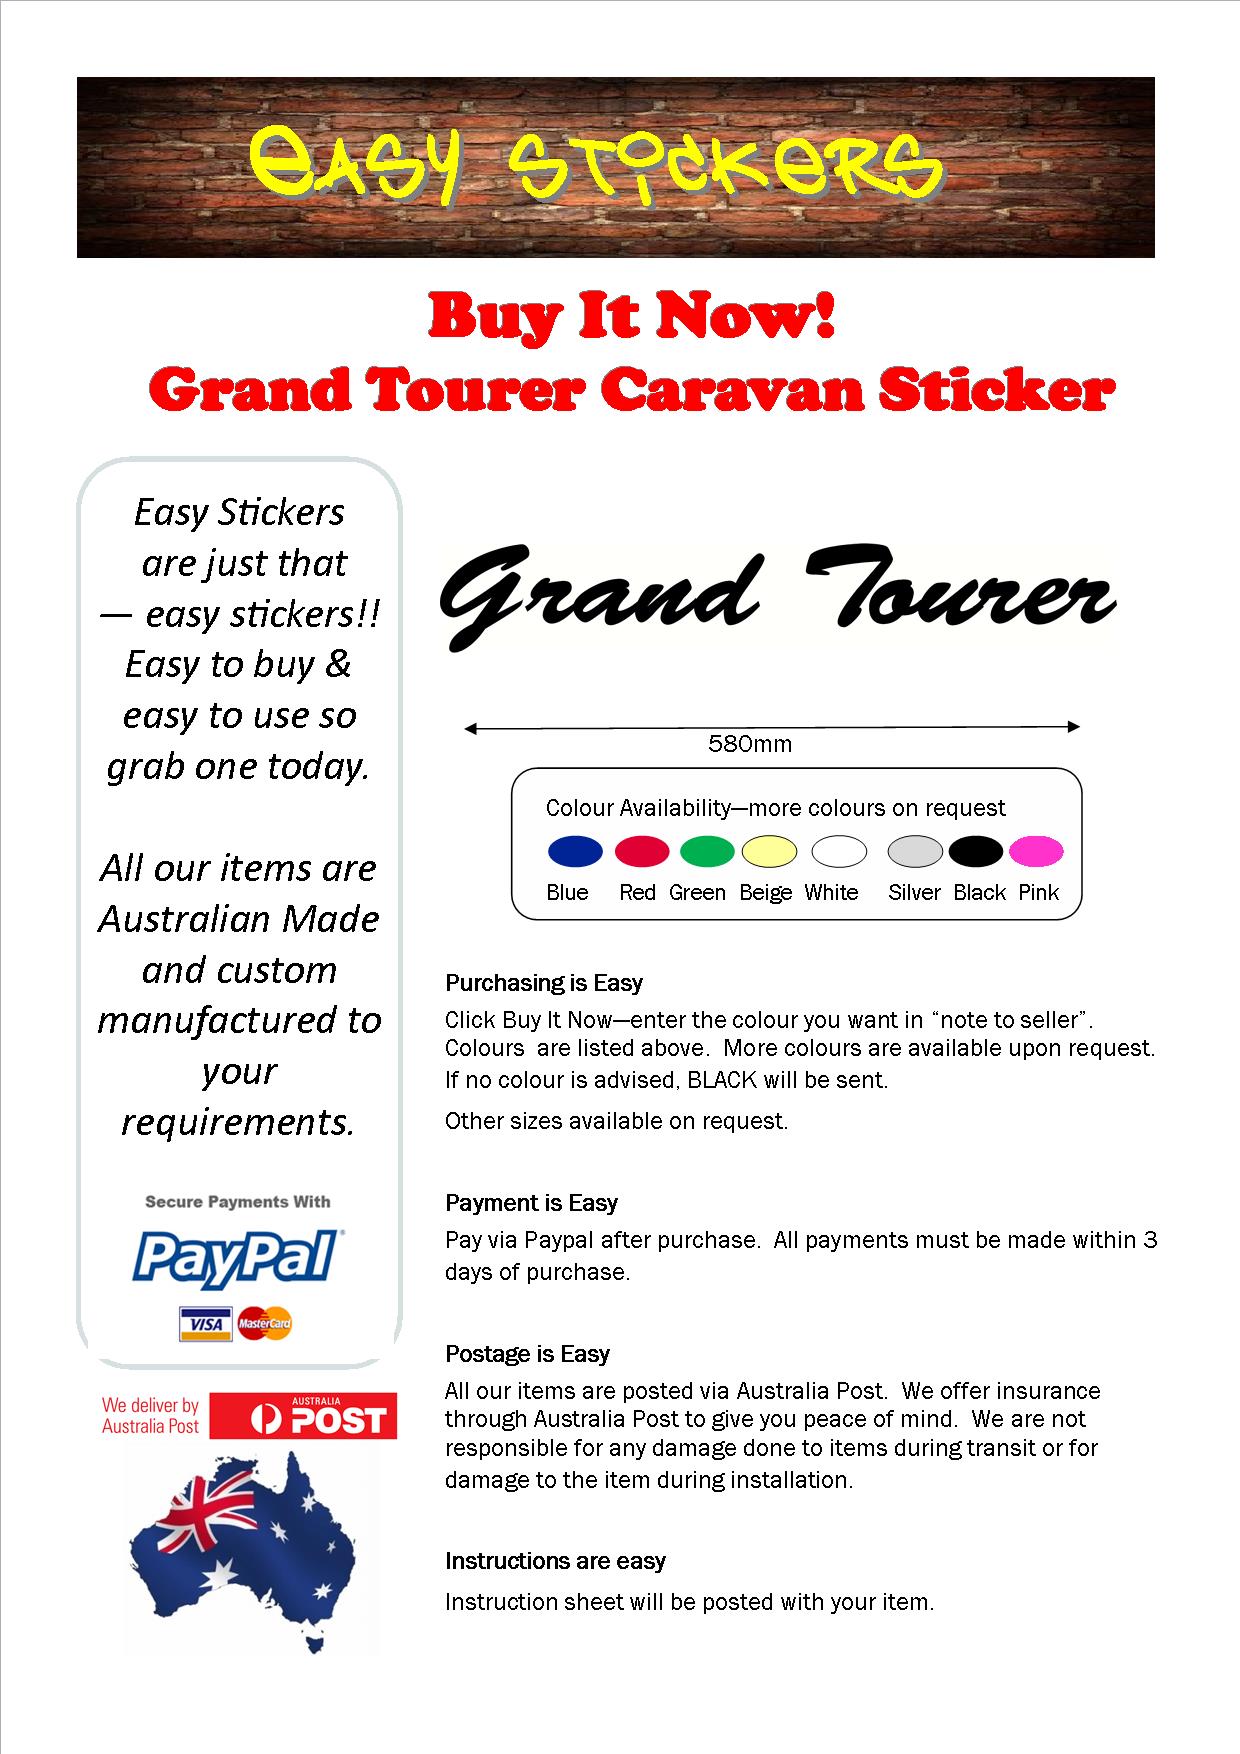 Ebay Template 580mm Grand Tourer.jpg  by easystickers